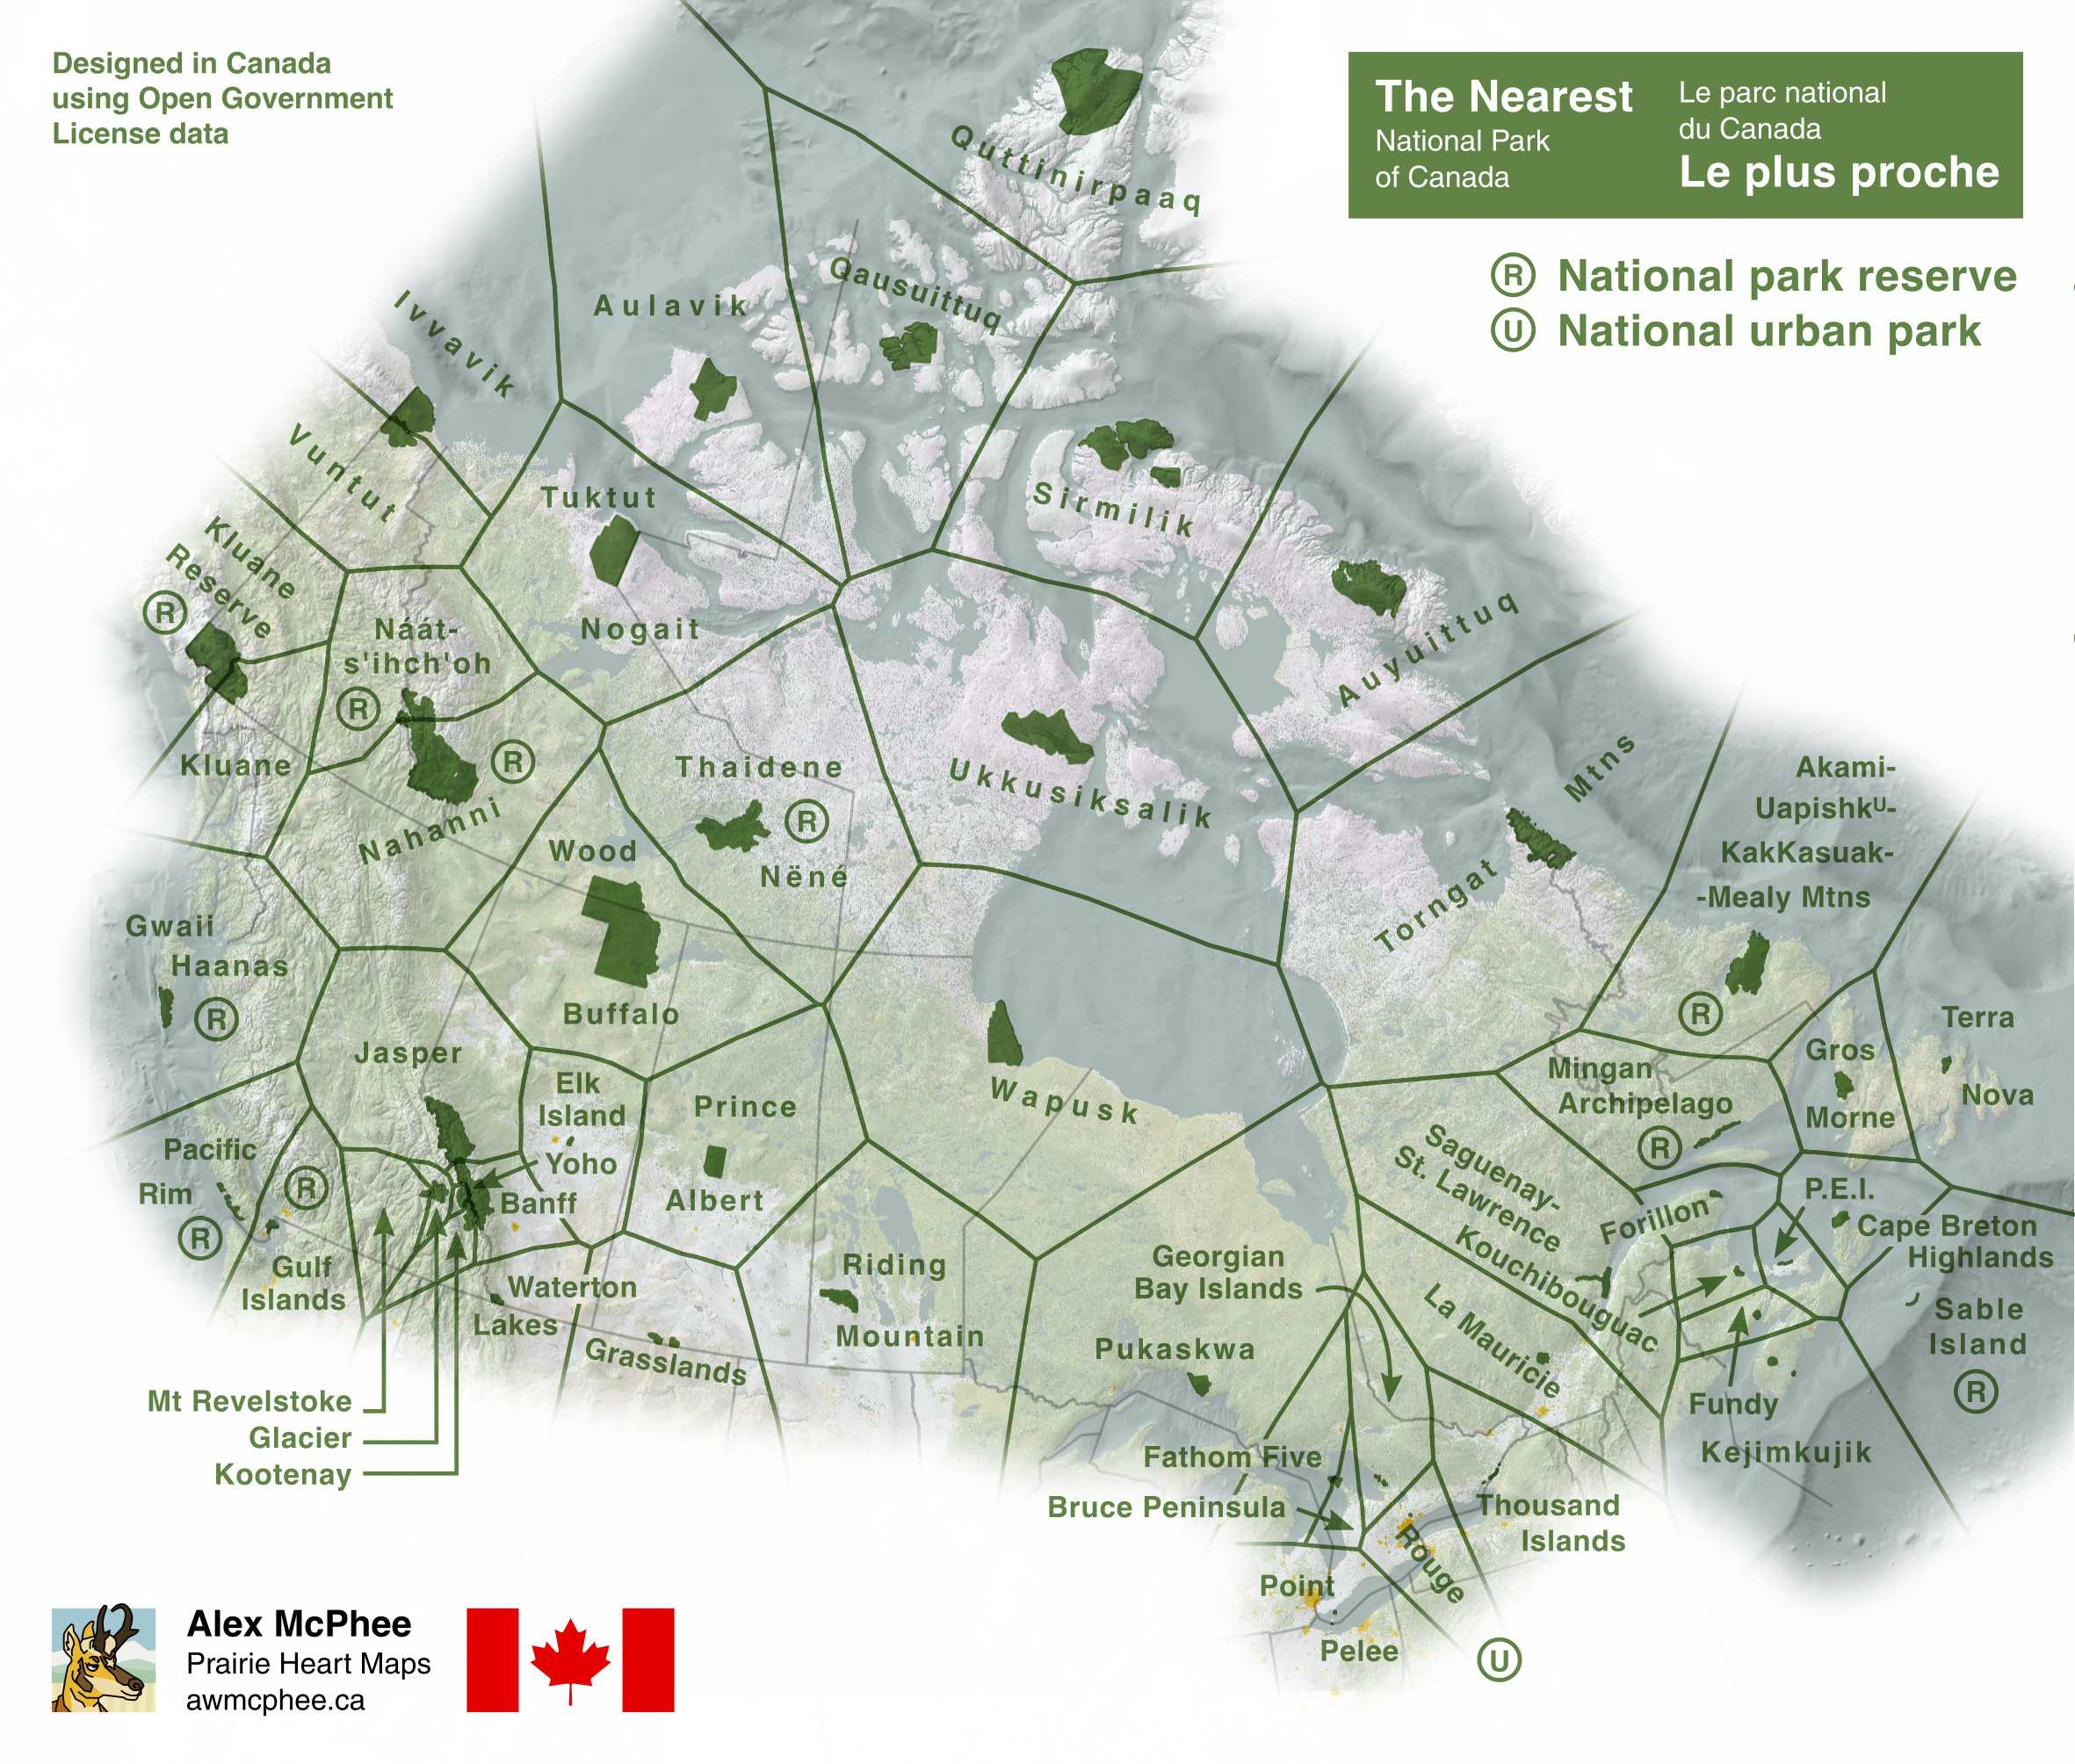 A map of the nearest National Park of Canada to any point in the country.